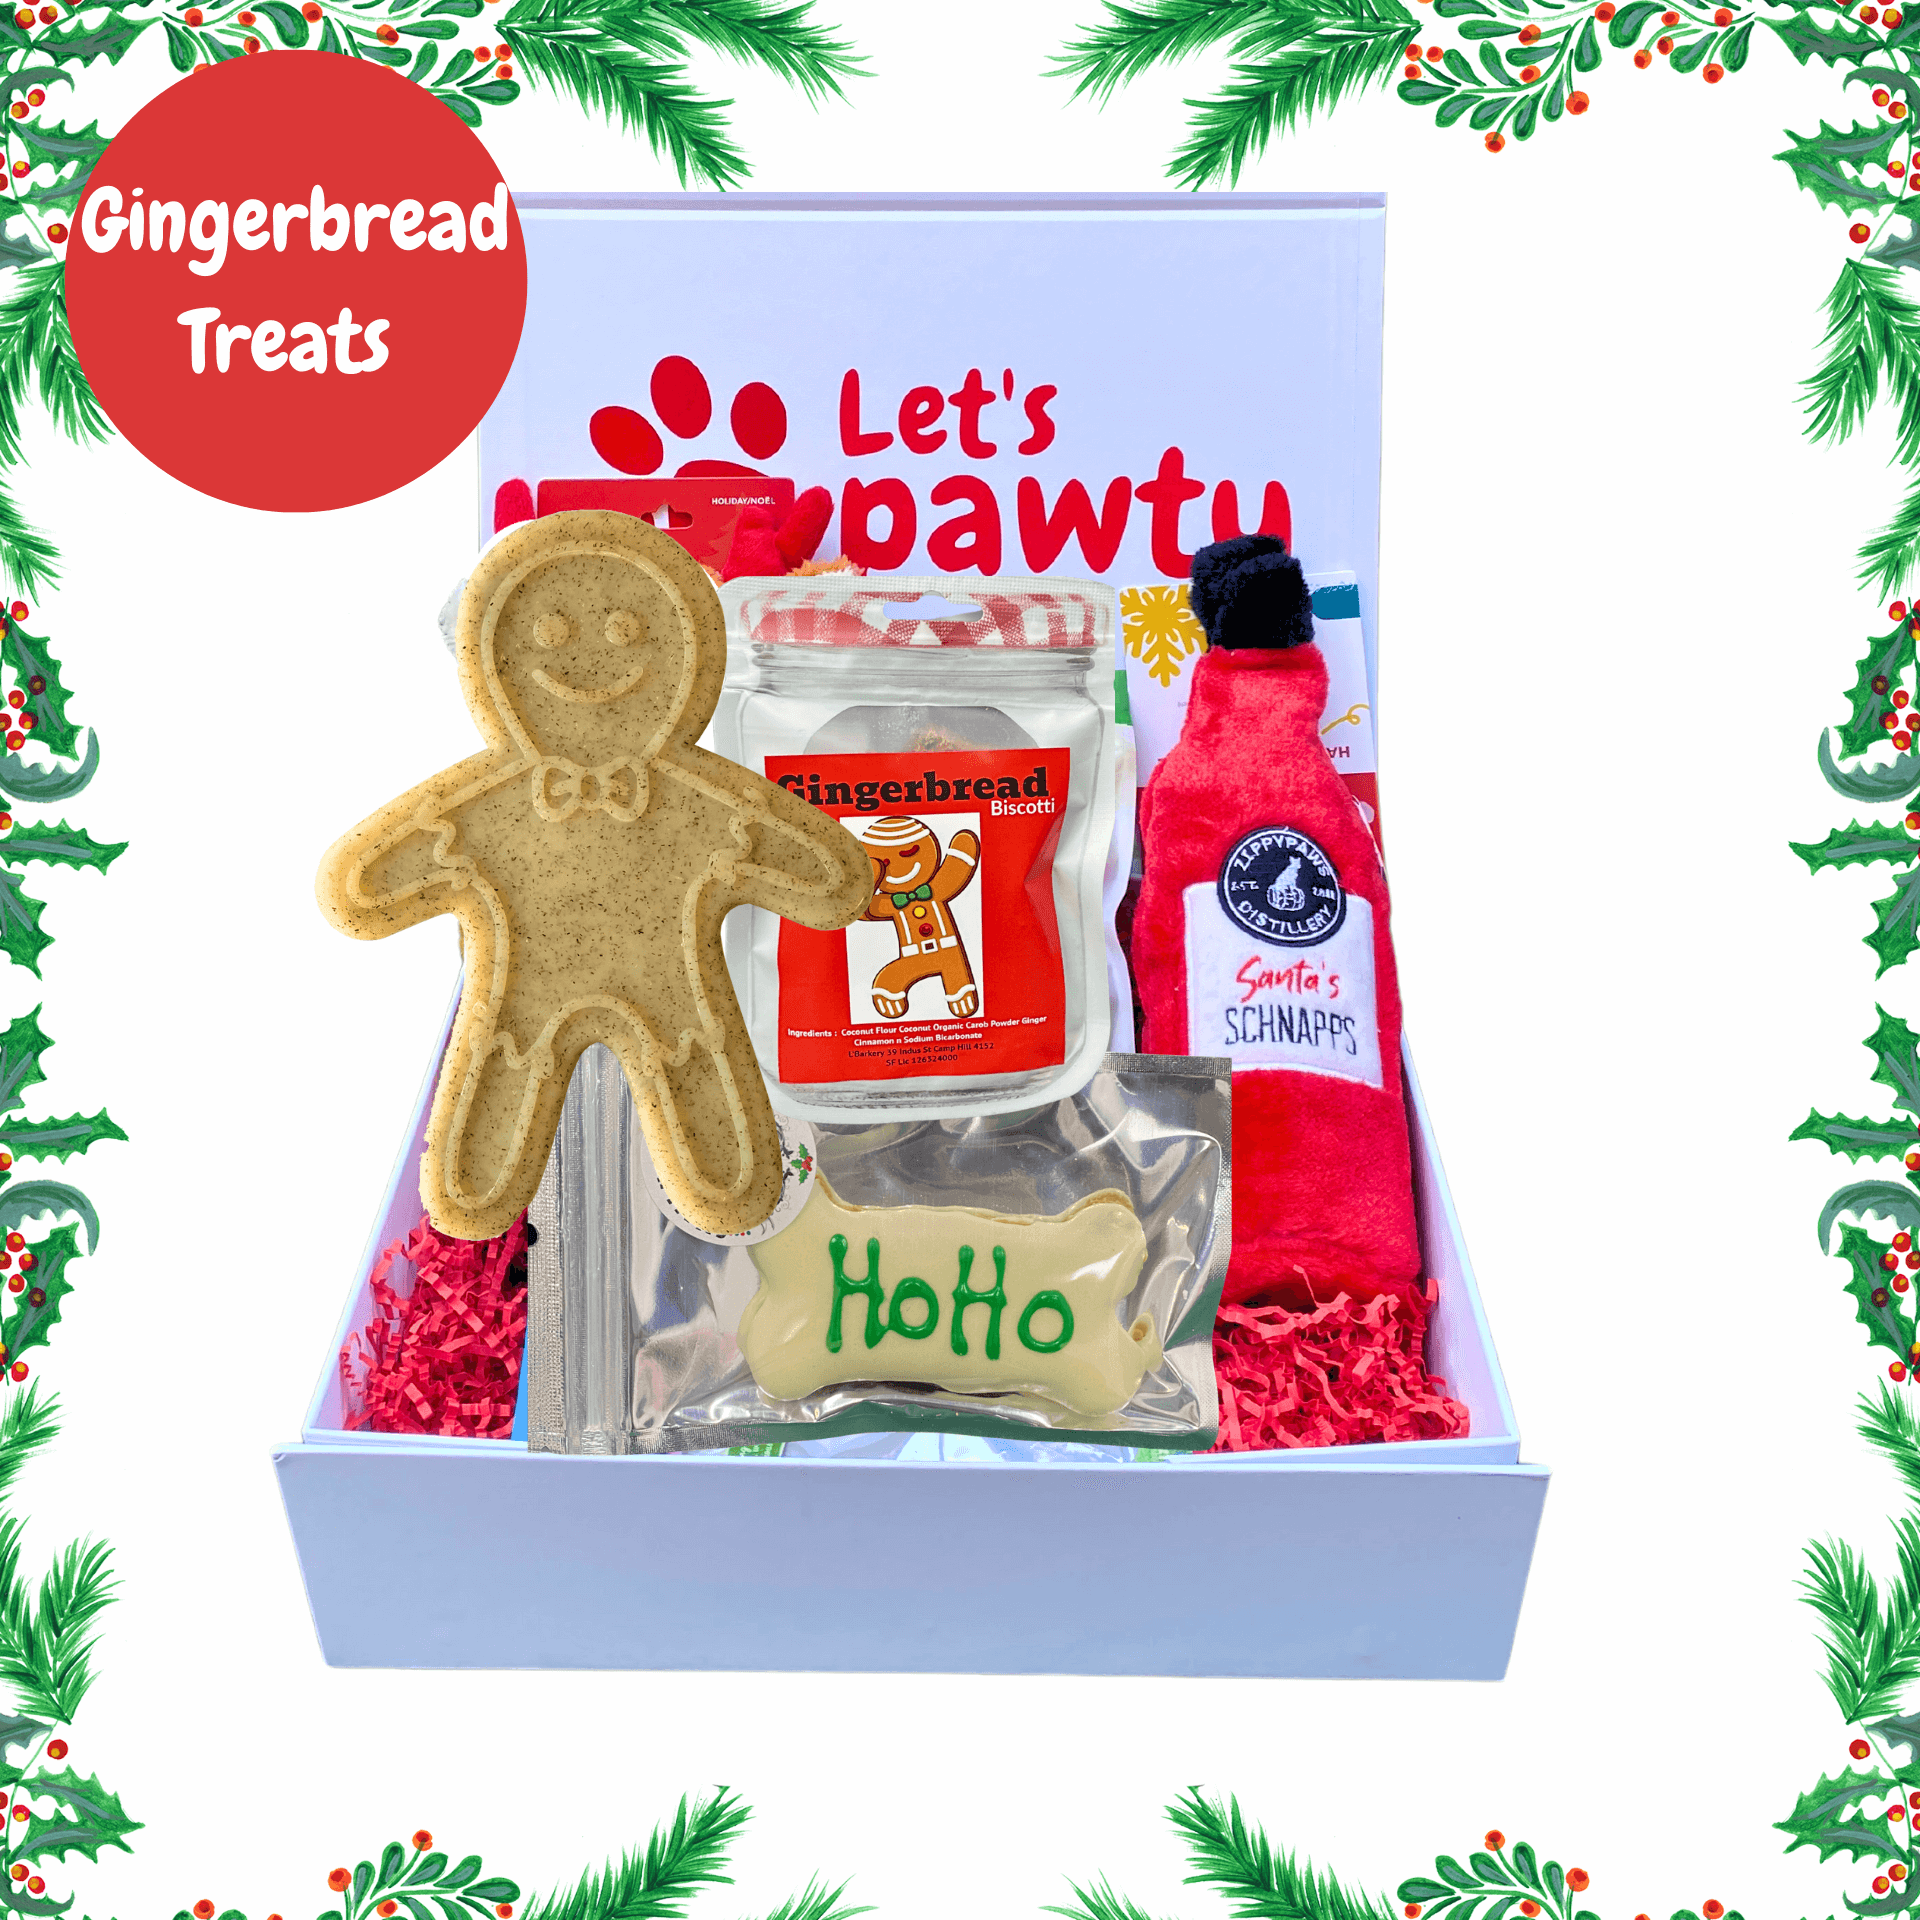 Gingerbread, Christmas dog gift box, Let's pawty 